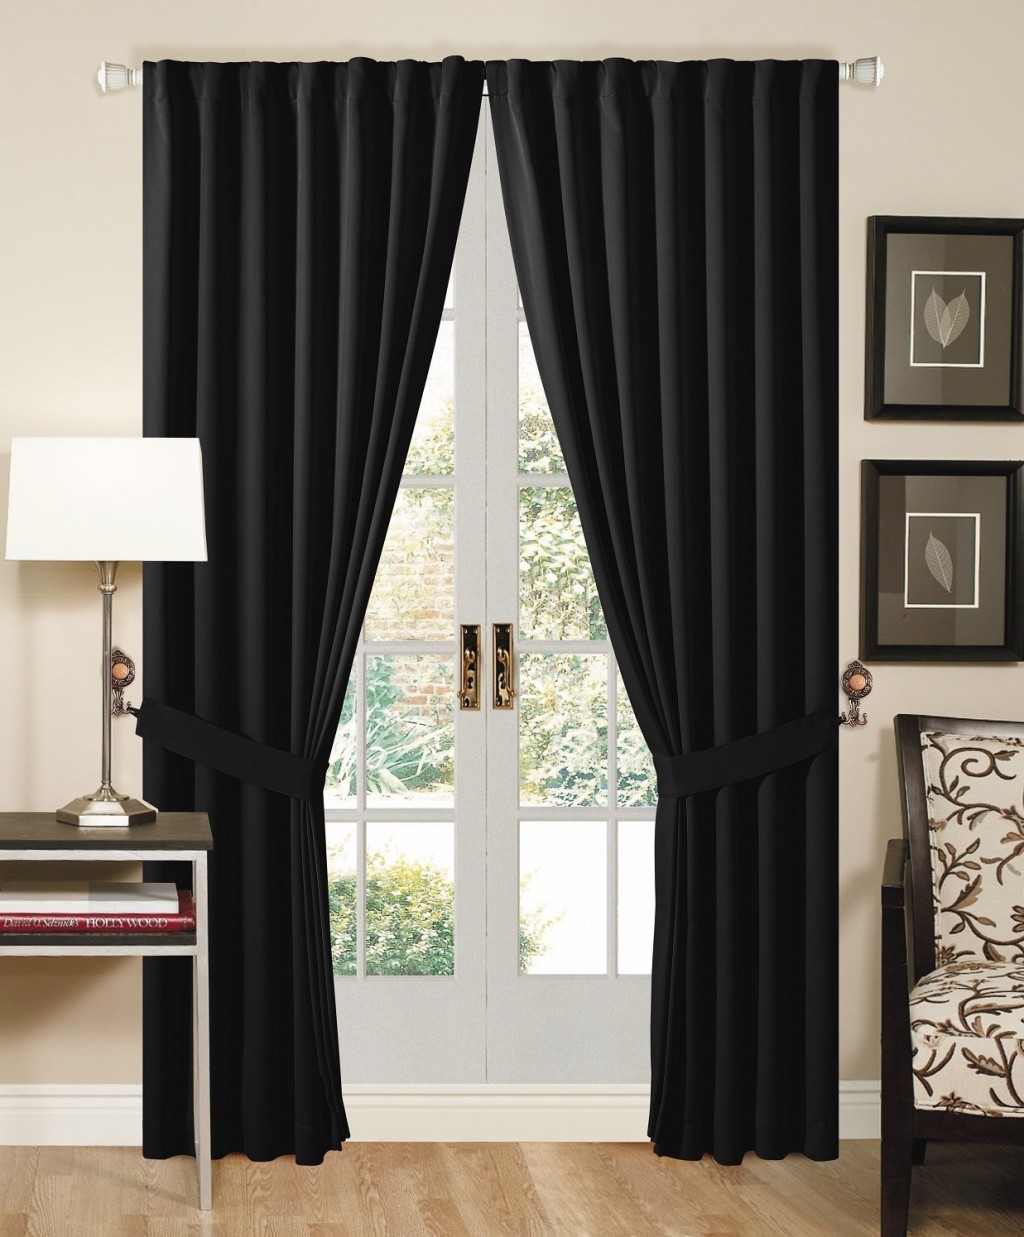 Insulated Curtain Panels in Curtain